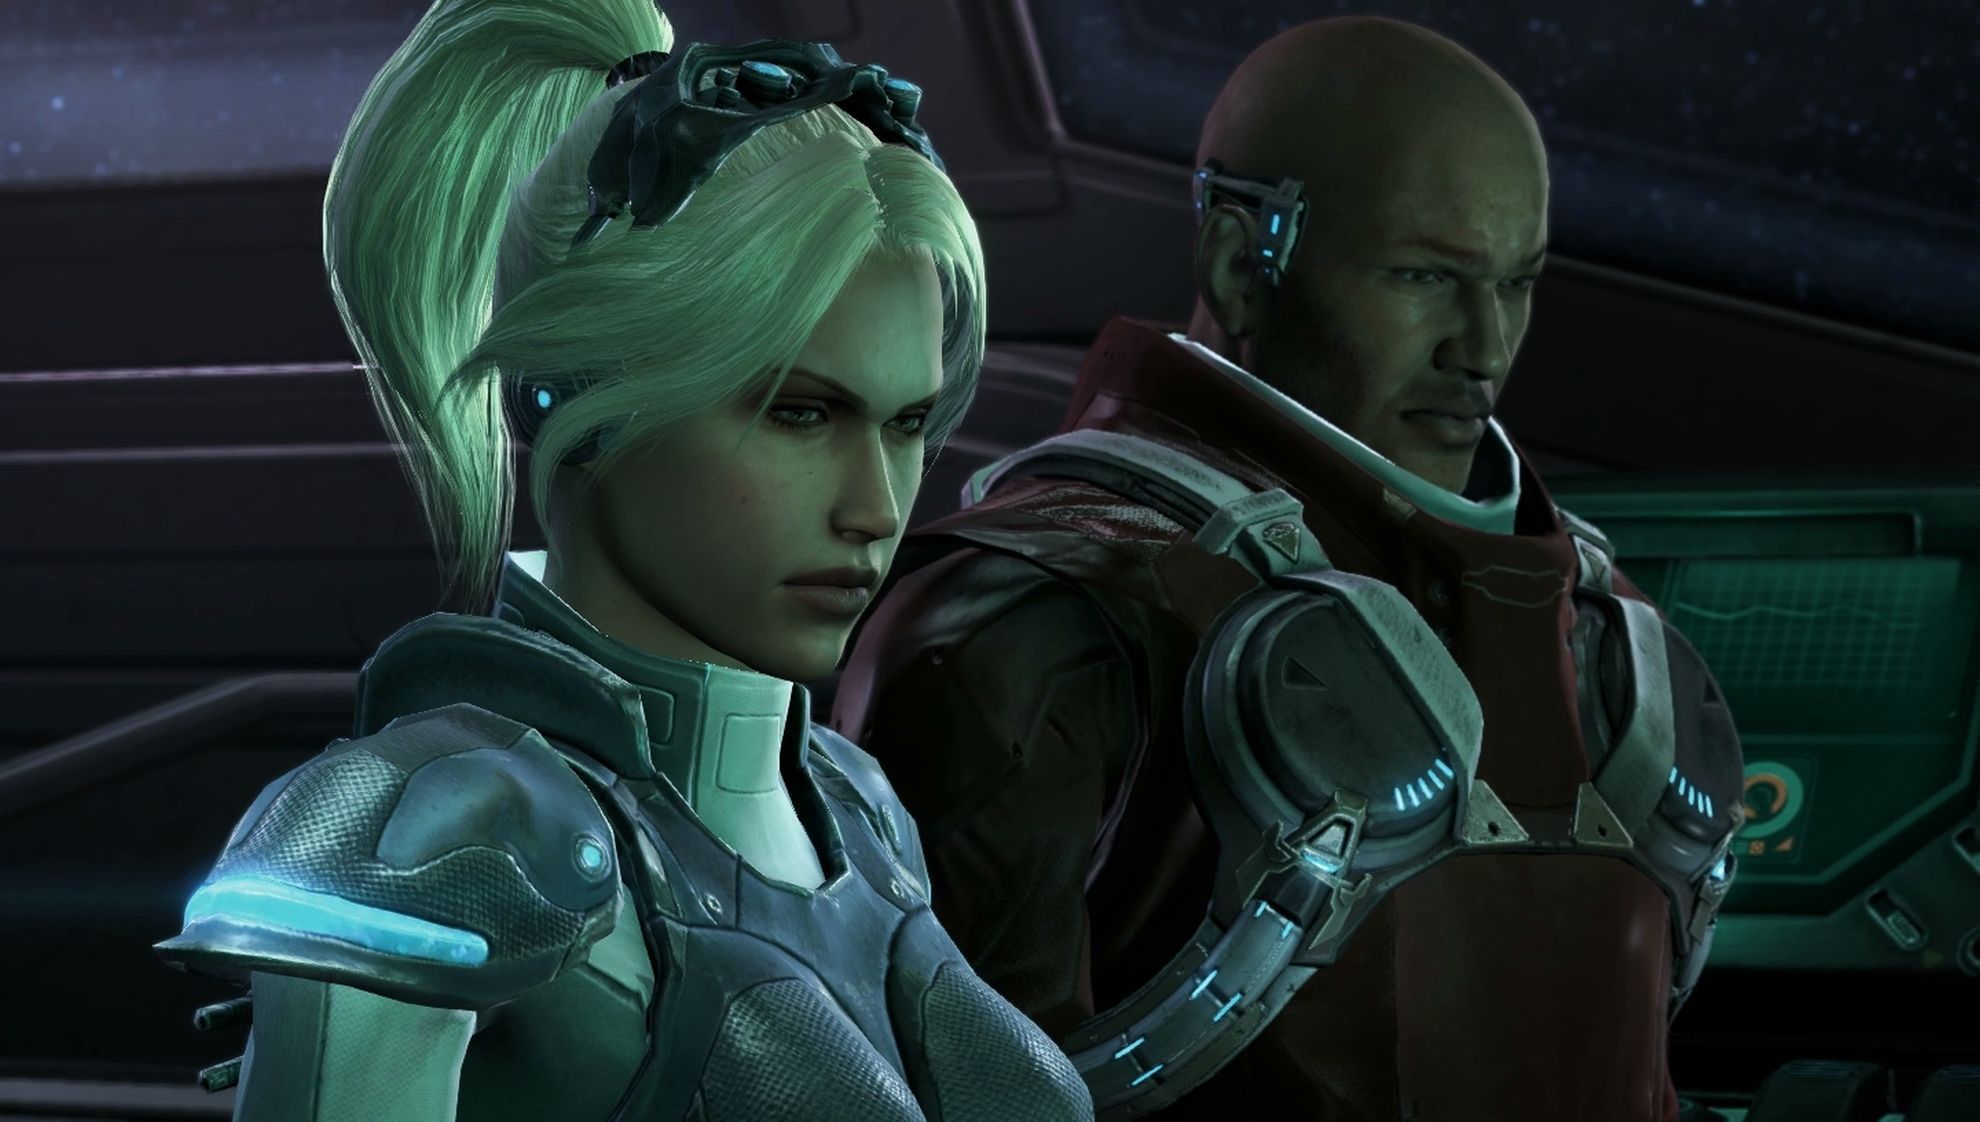 Image for StarCraft 2 - final Nova Mission out this month, Alexi Stukov's coming to Co-Op, War Chest, other features in the works